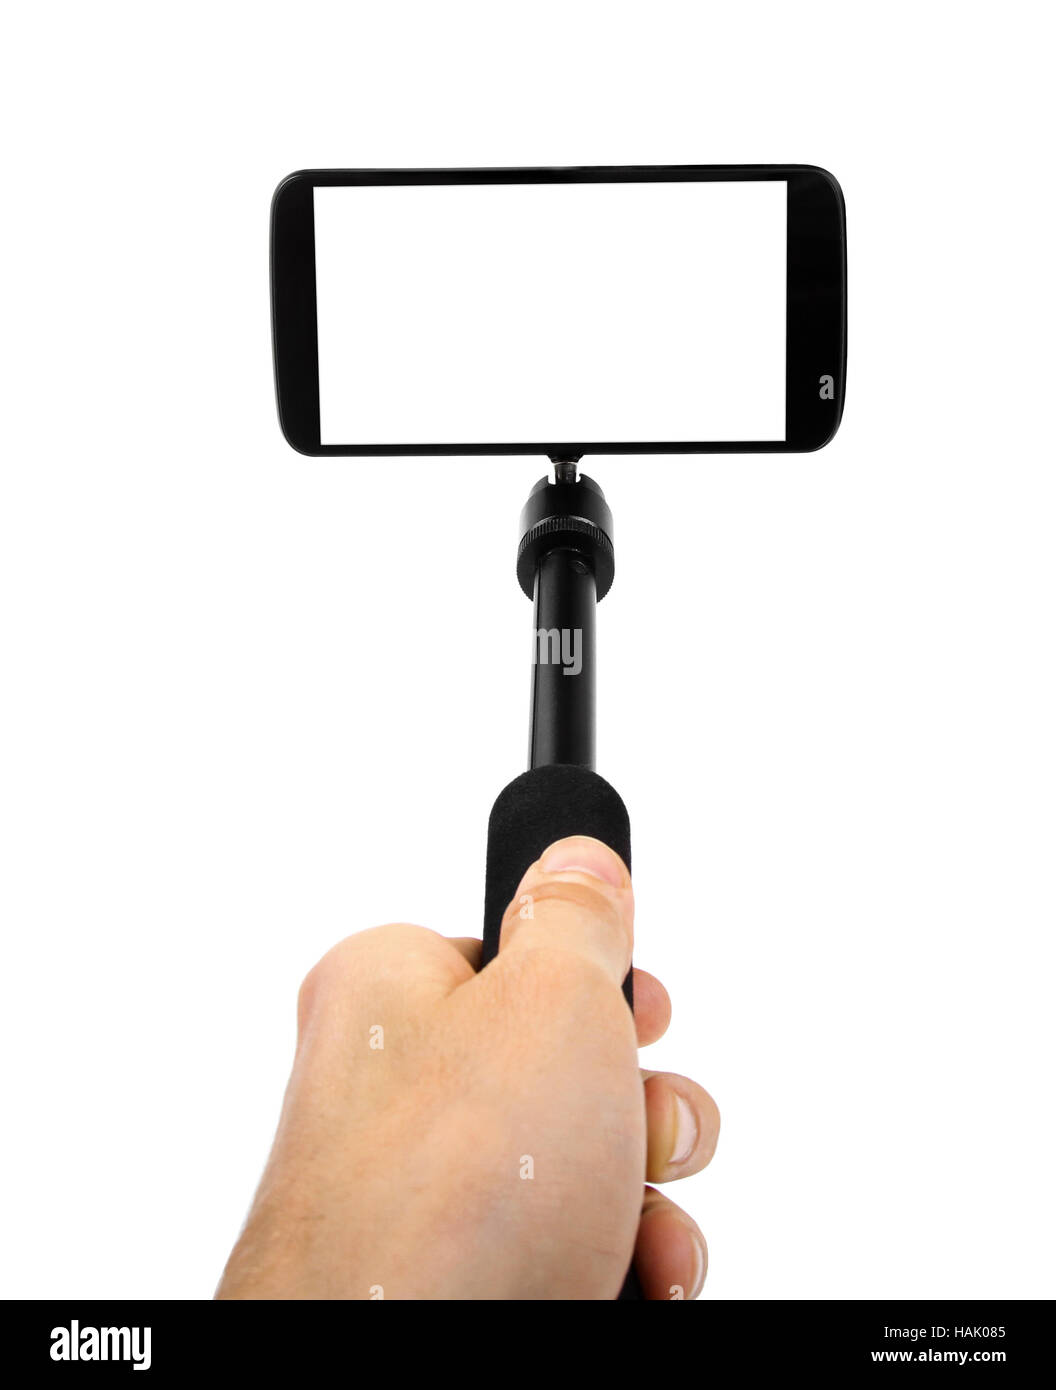 taking selfie - hand hold monopod with mobile phone Stock Photo